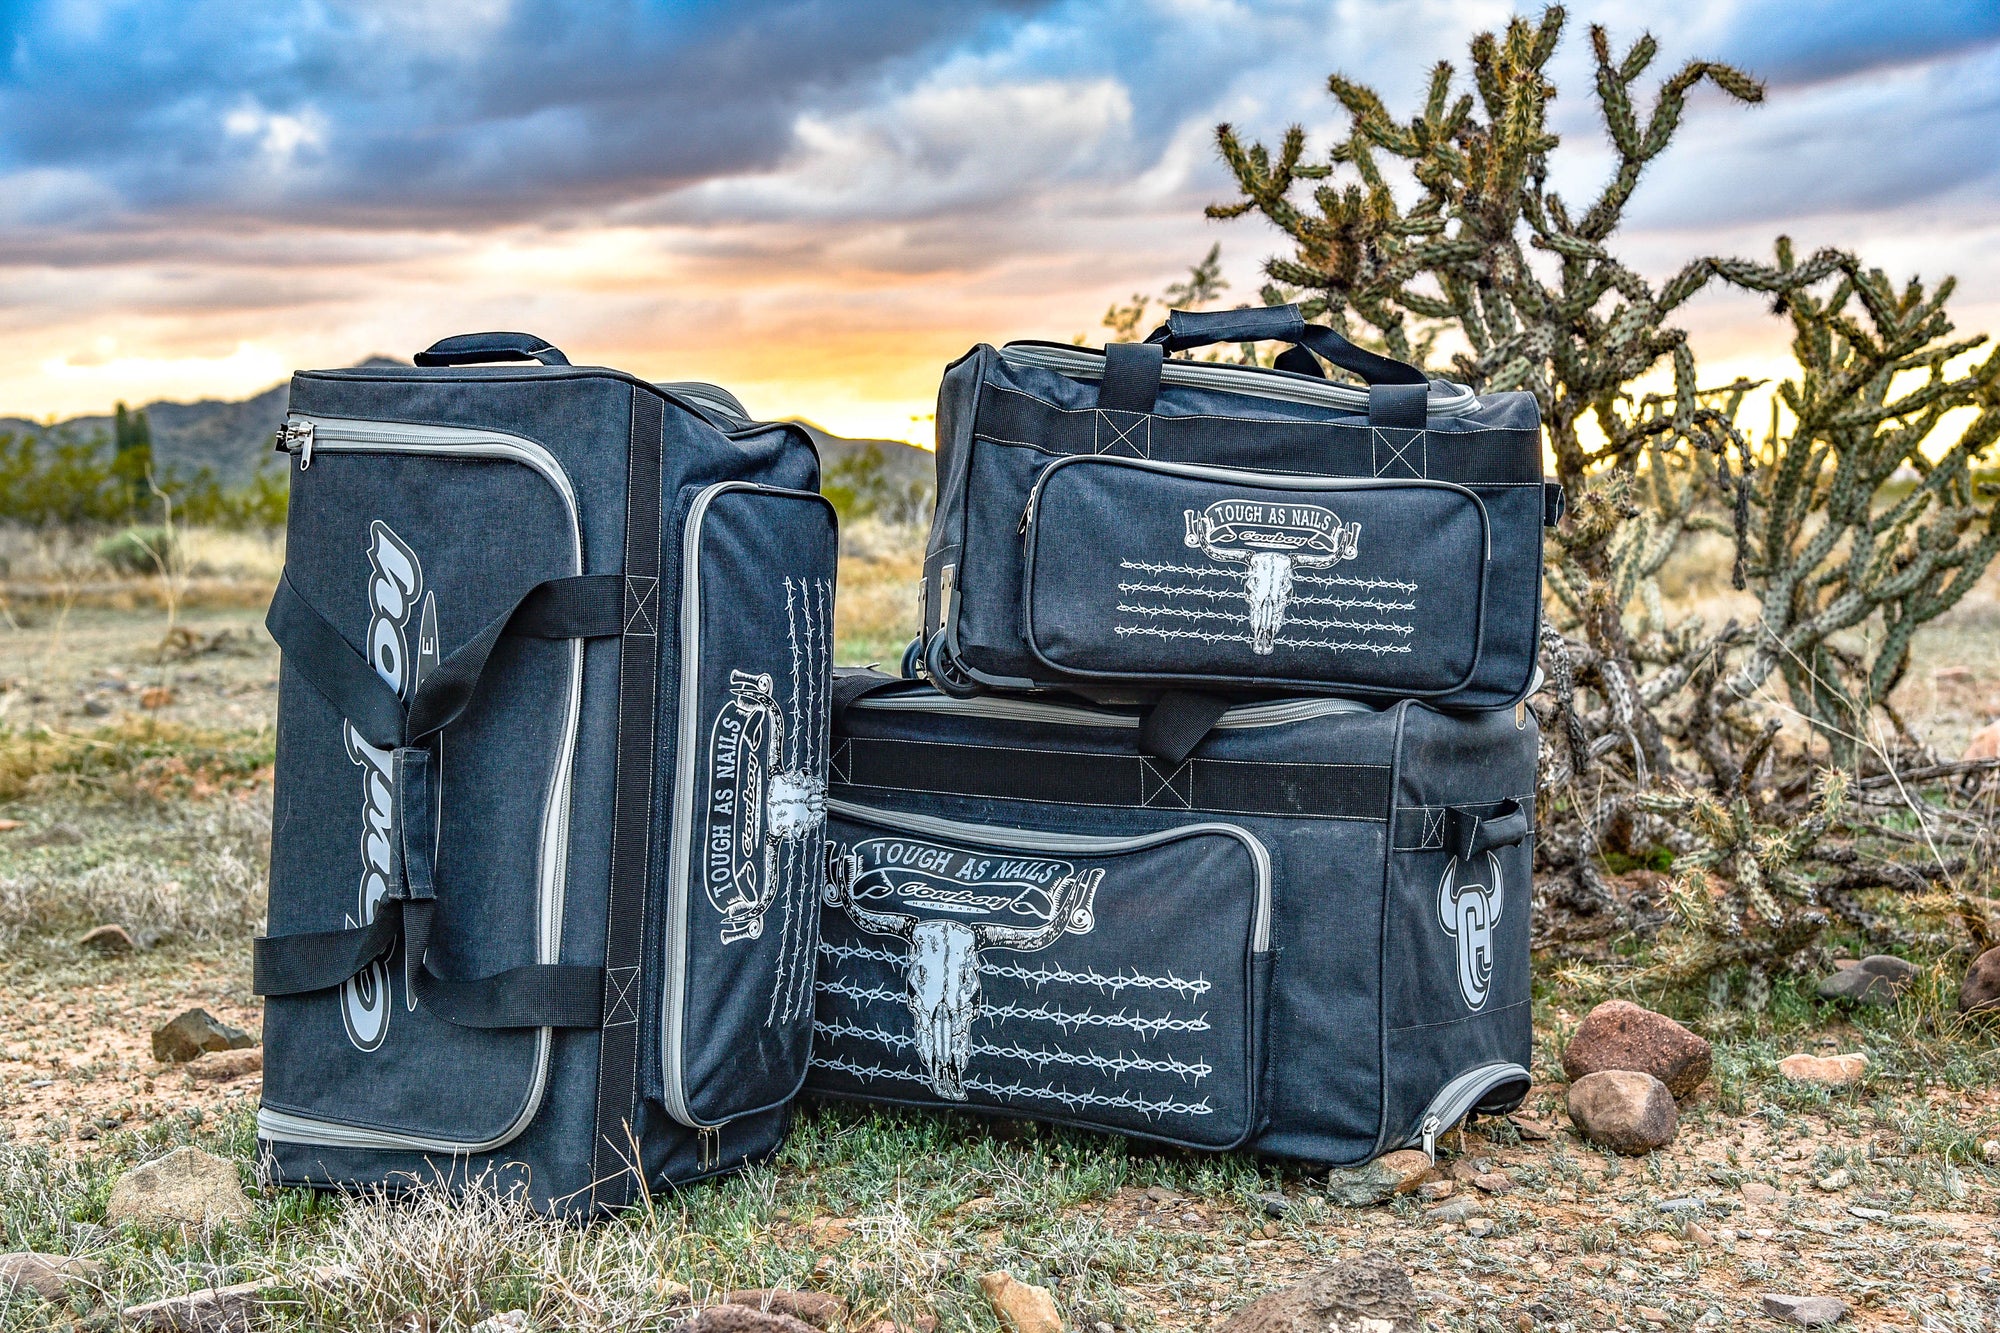 All Sizes of Cowboy Hardware Tough as Nails Gear Bags in Grey and Light Grey